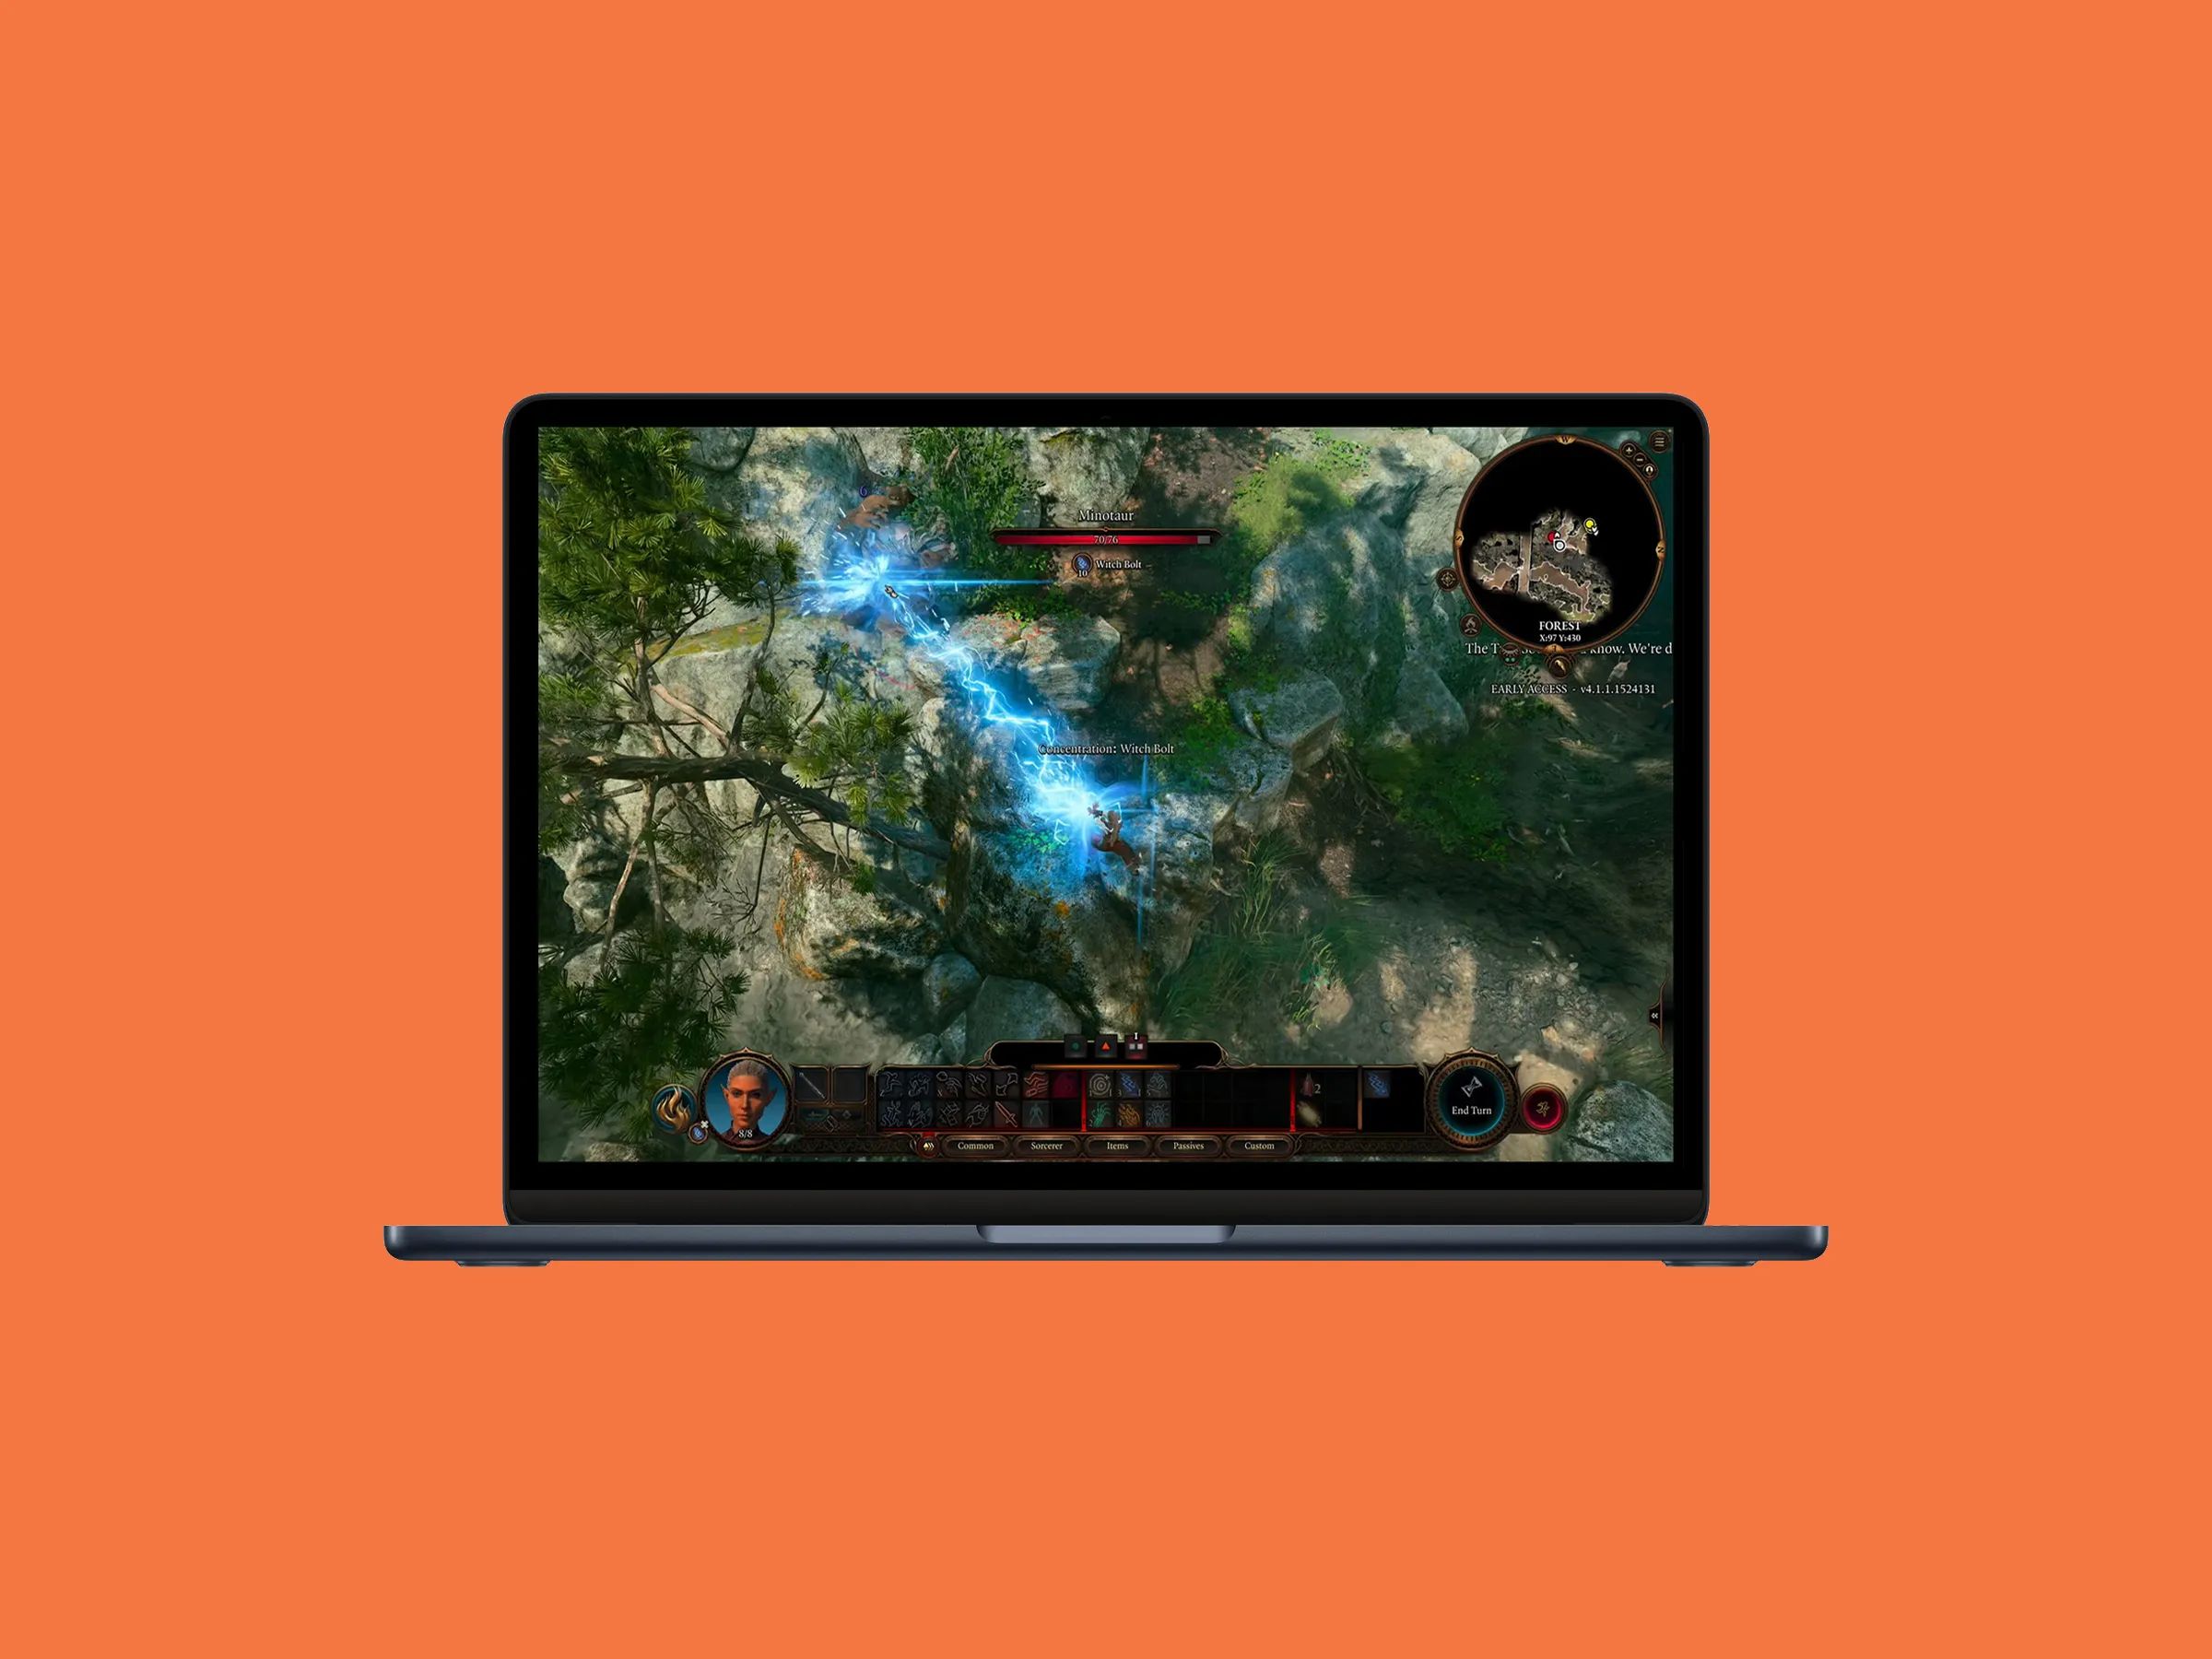 What FPS Should Minecraft Run At On A Gaming Laptop